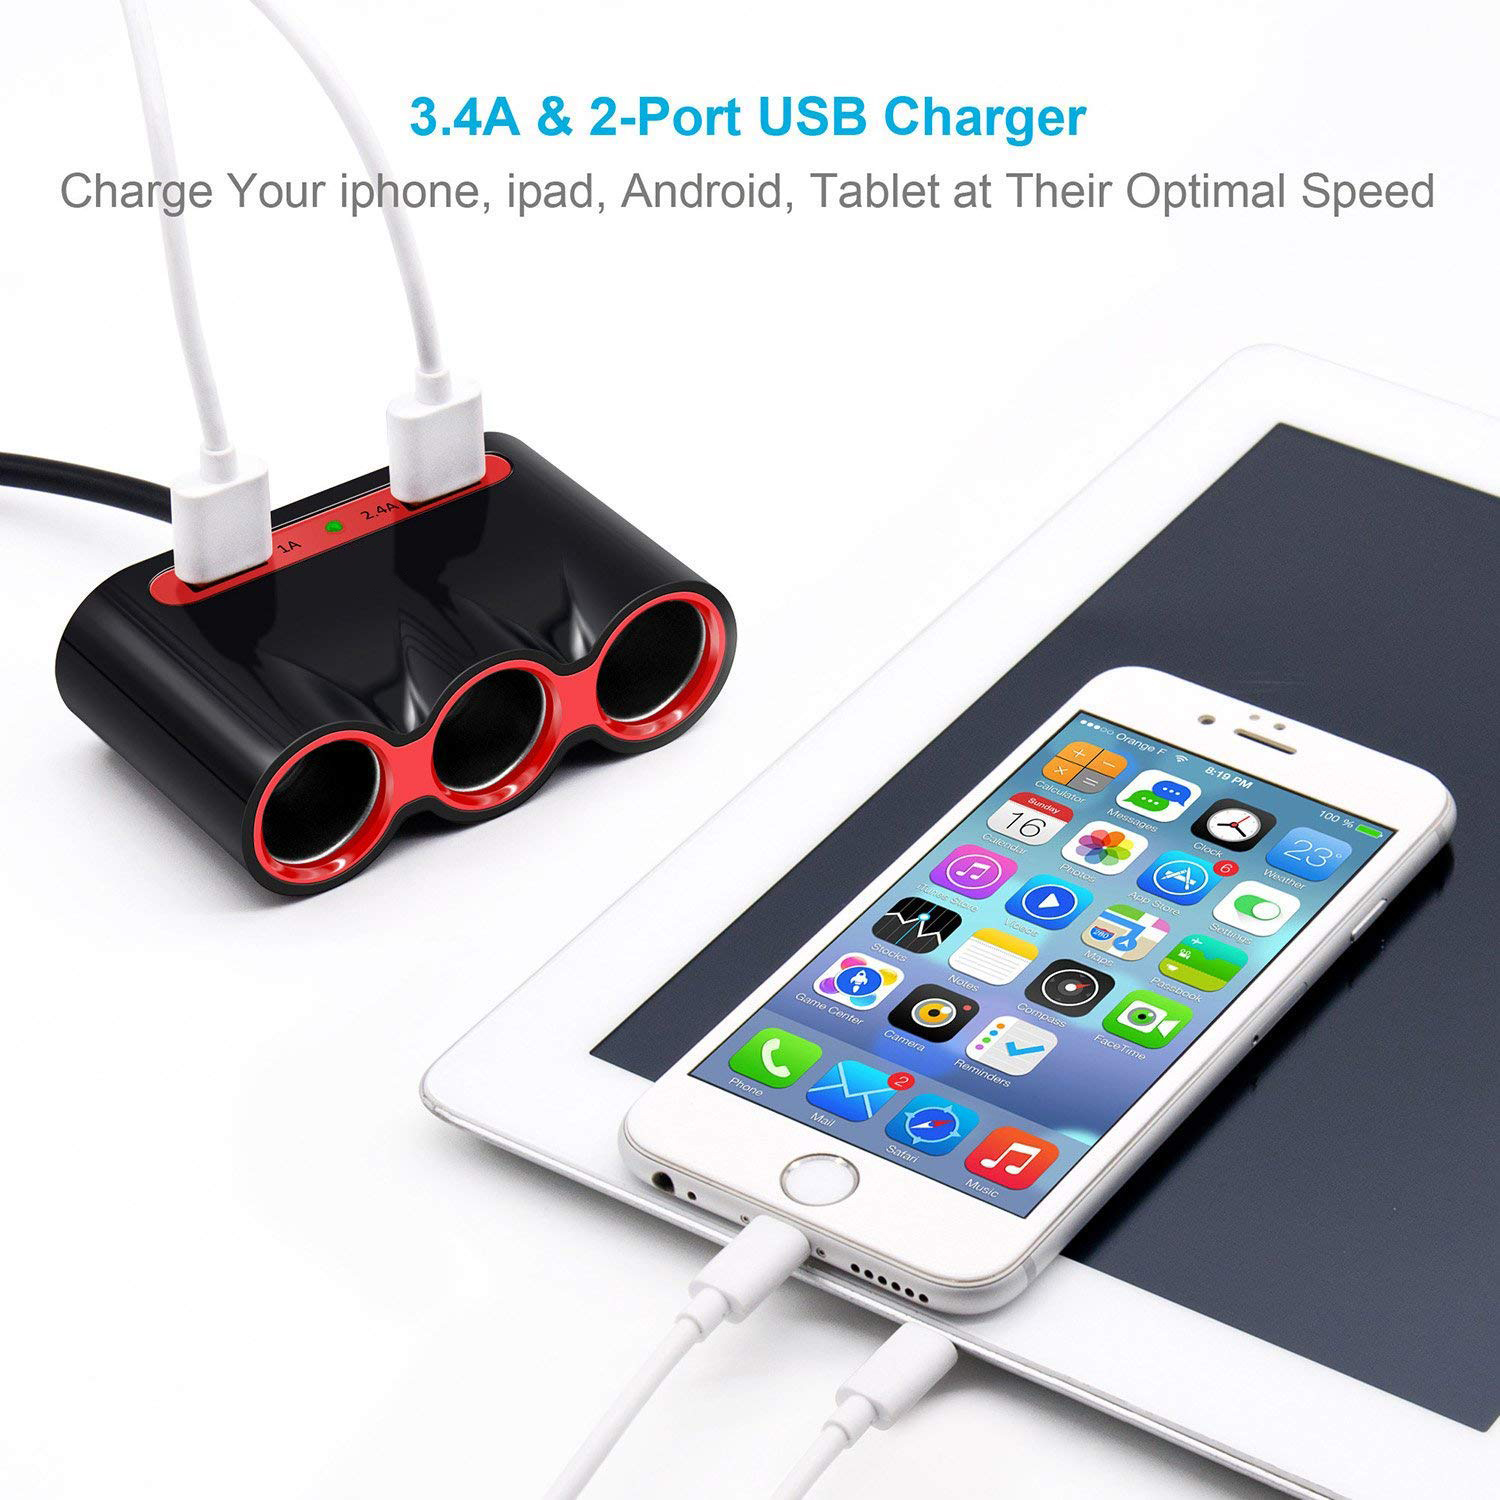 45W USB Car Charger with 5 USB A ports